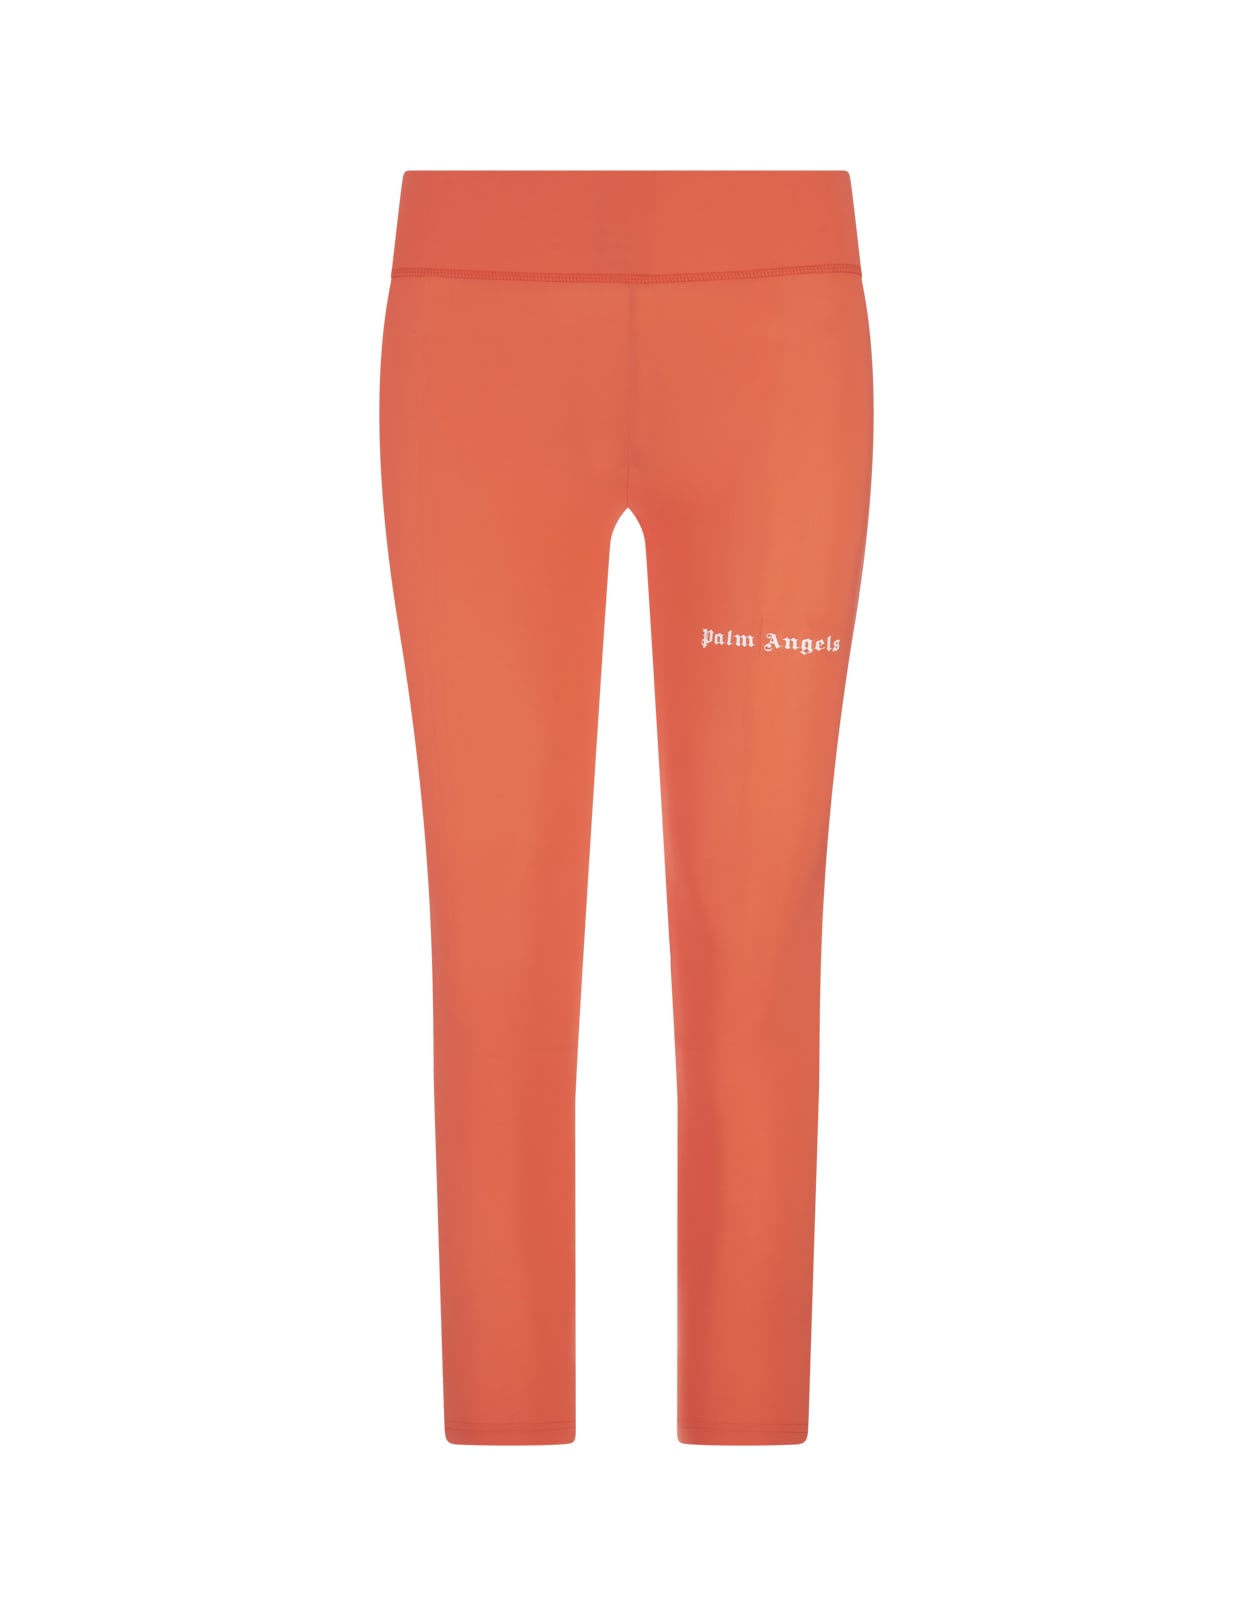 PALM ANGELS ORANGE LEGGINGS WITH CONTRAST LOGO AND SIDE BANDS